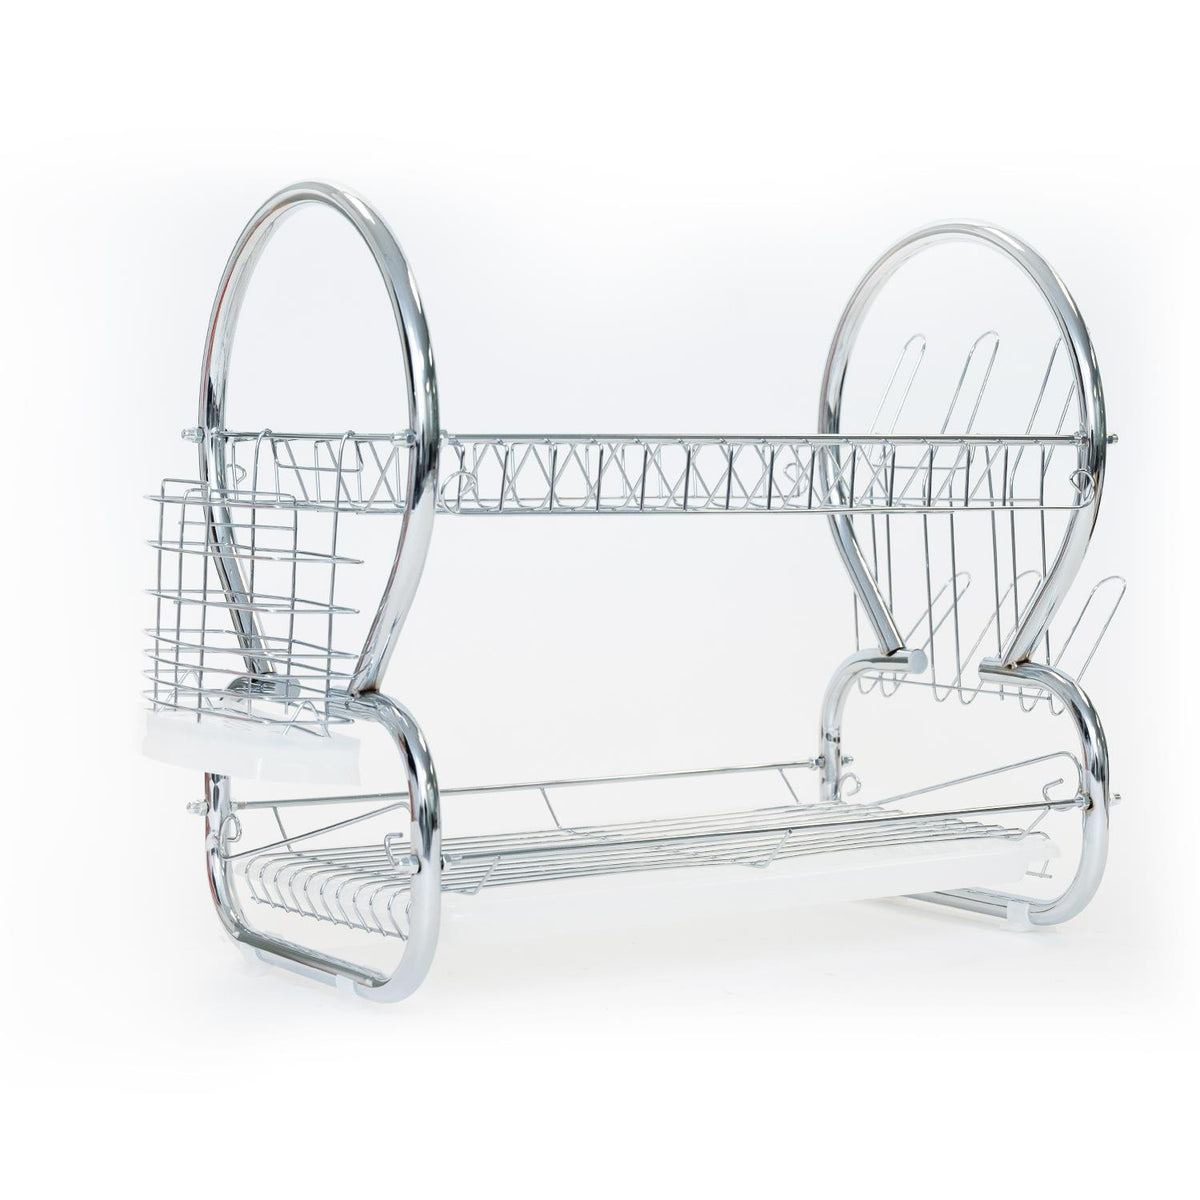 22 Inch Chrome Dish Rack with Utensil Holder, Cup Rack and Tray